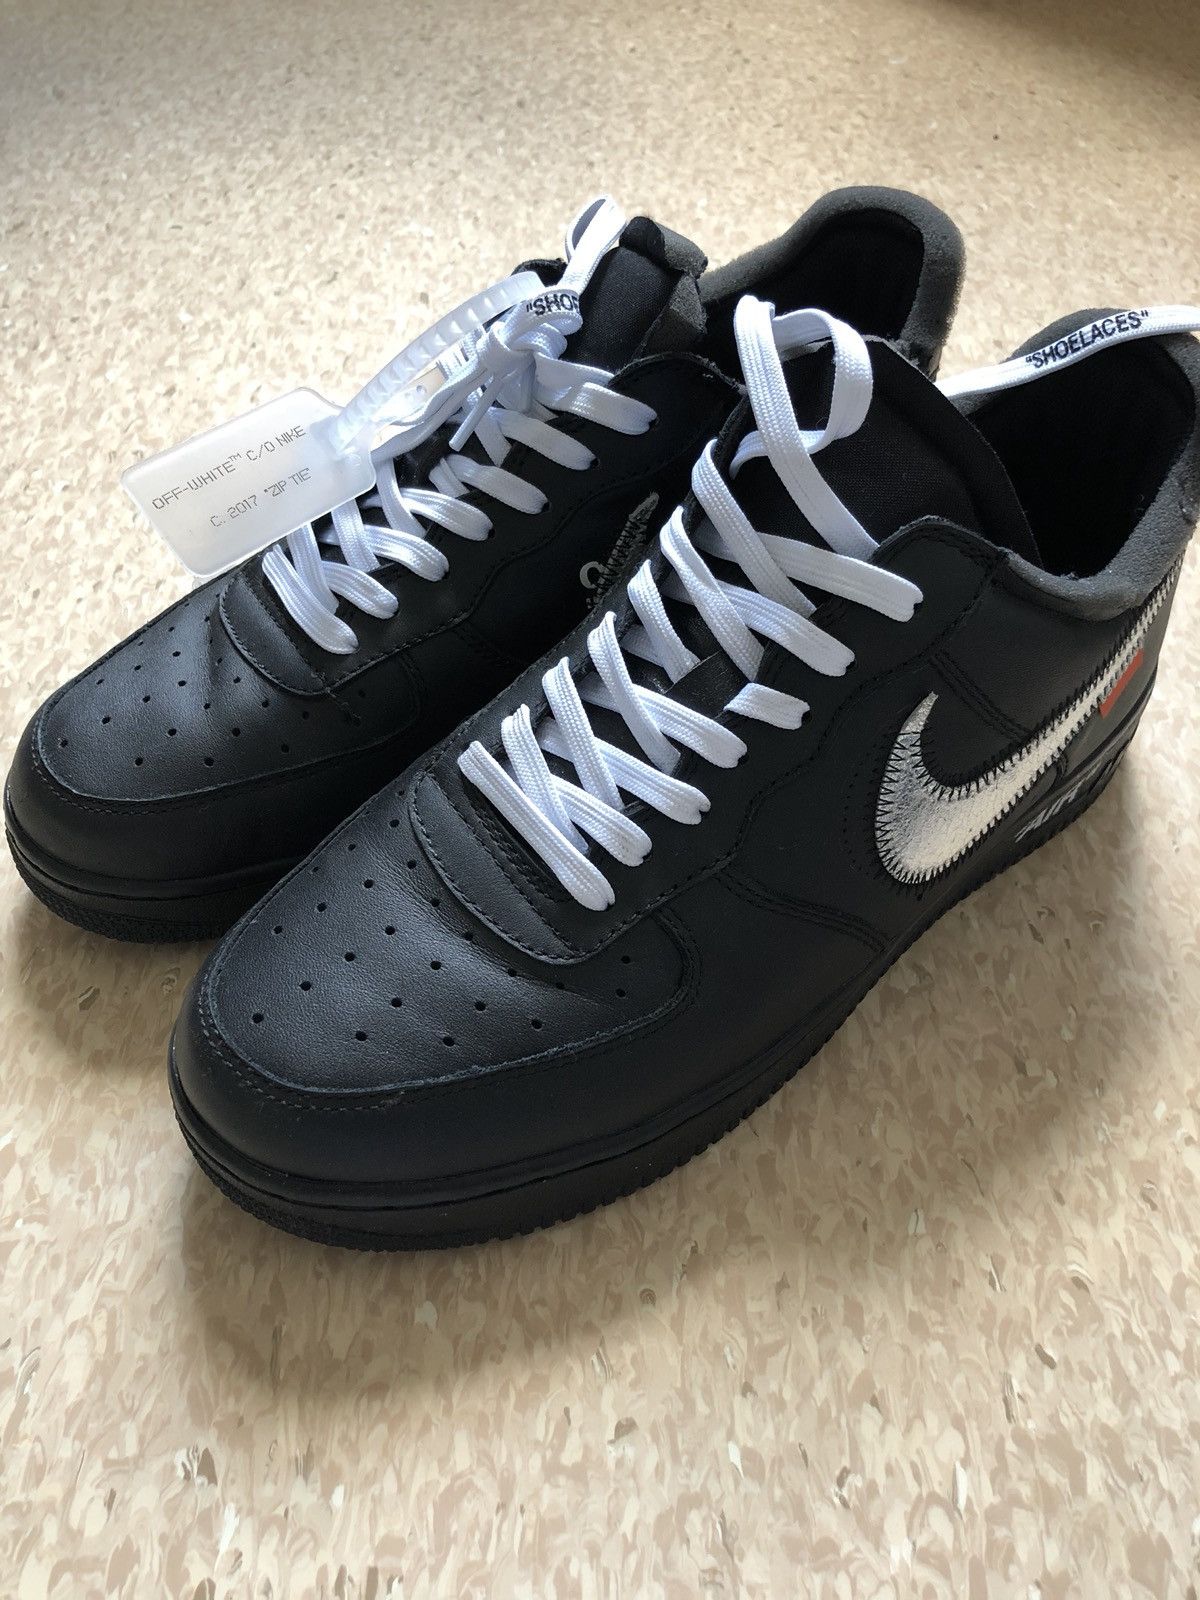 $1300. Off-White AF1 MOMA. Size 7.5. Used. For sale or trade in store  Friday at 12pm. #D1NY #MoMA #virgilabloh #offwhite